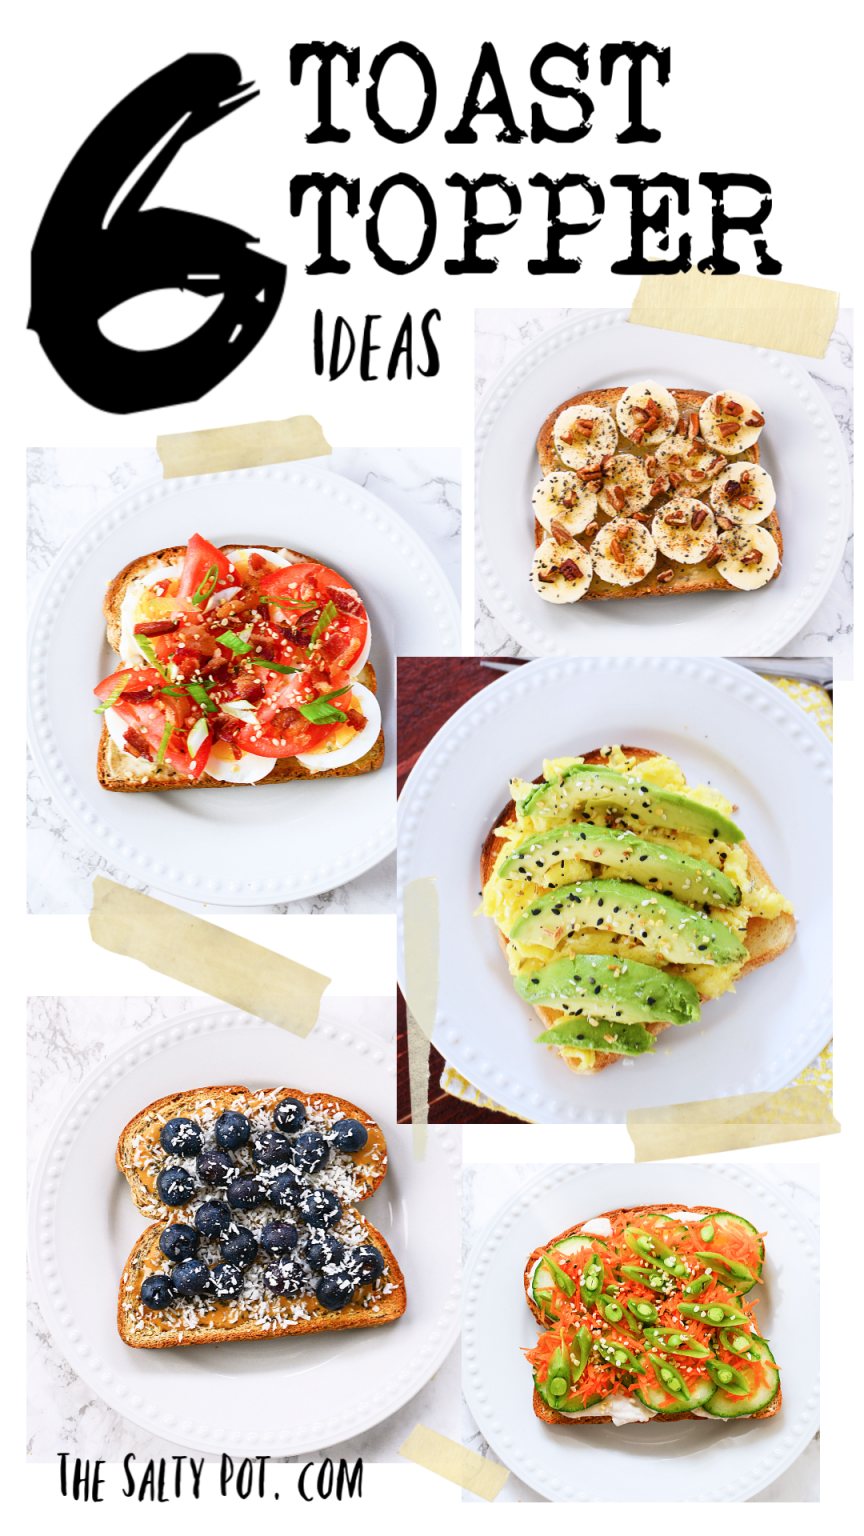 Toast Toppers: 6 ways to add WOW to your toast | The Salty Pot